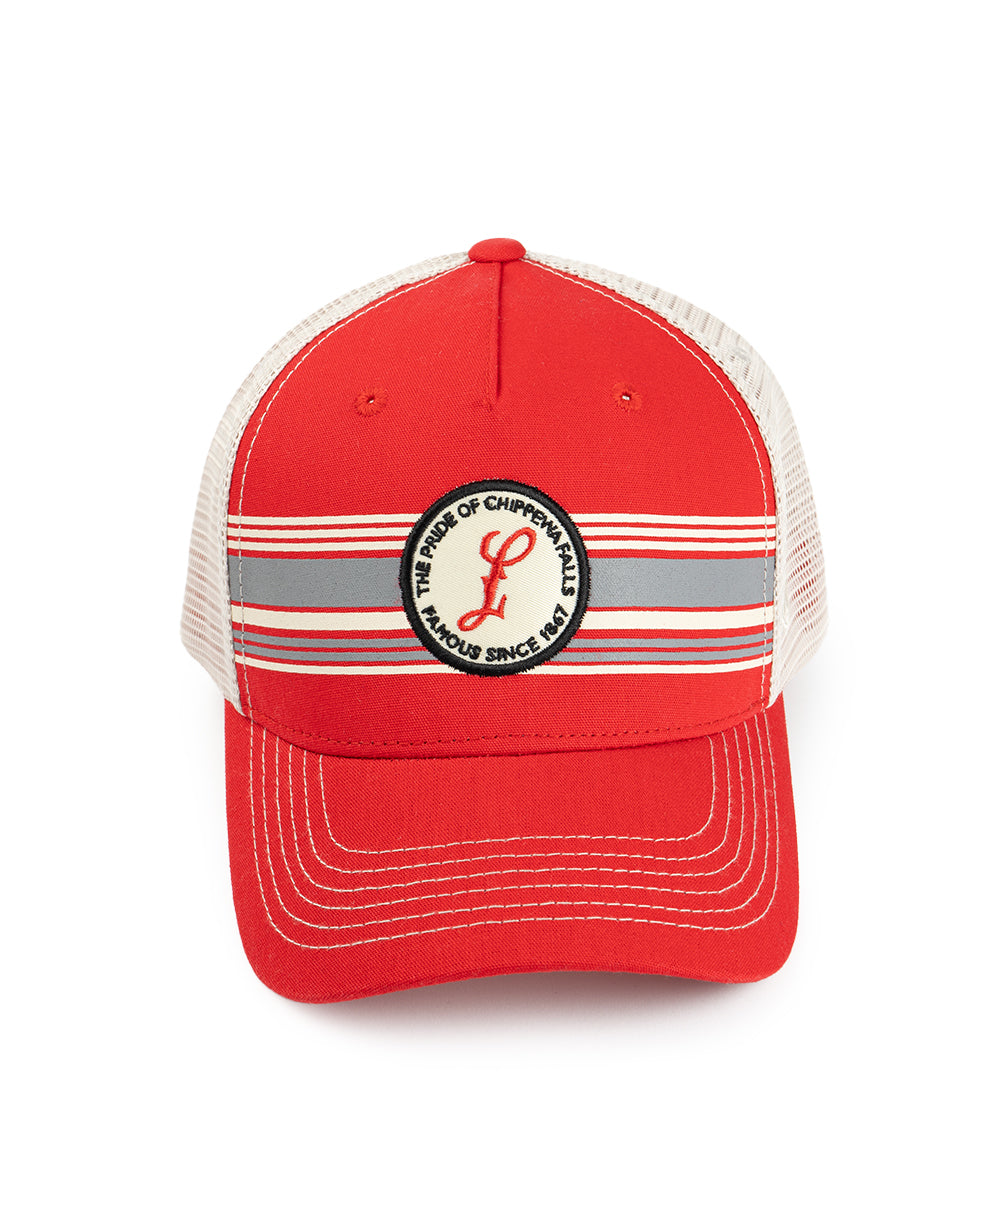 LEINIES RED/GRAY HAT